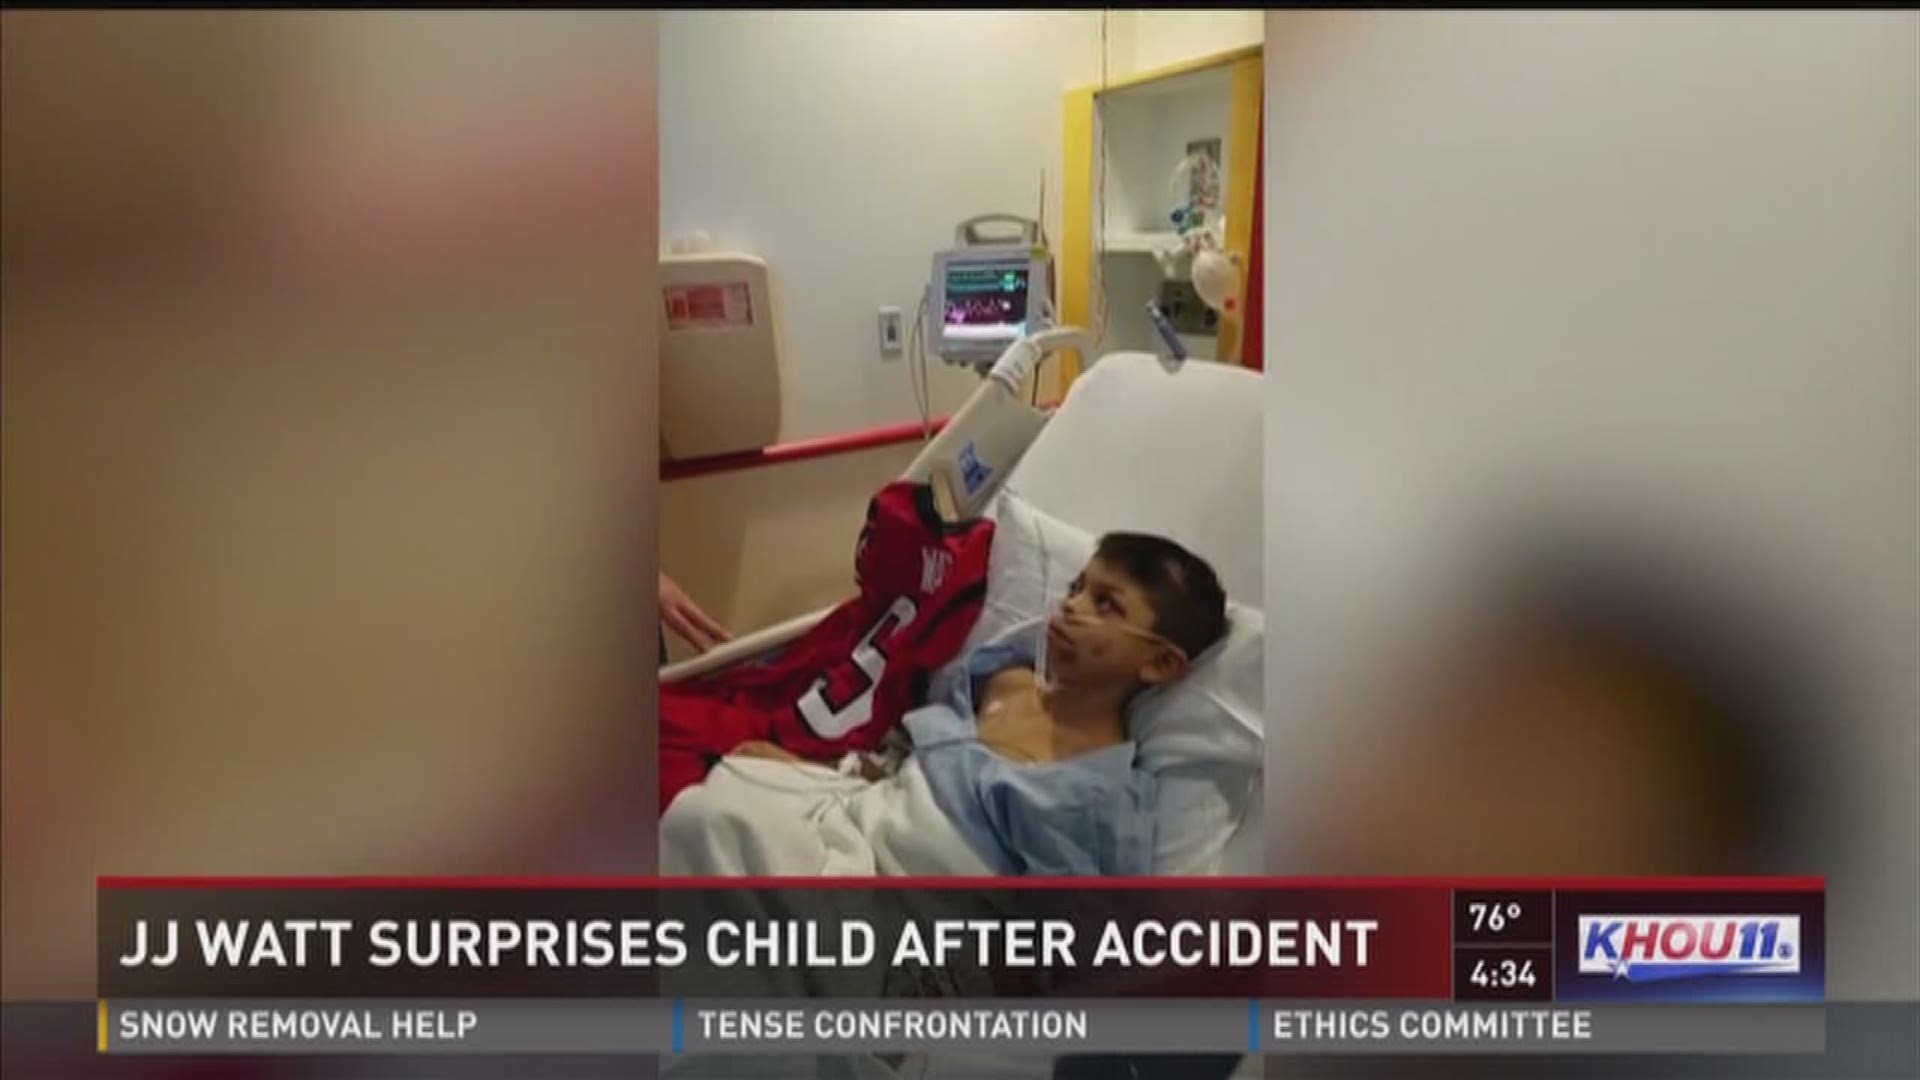 A young boy injured in a crash this weekend got a sweet surprise from Houston Texans star J.J. Watt on Tuesday.